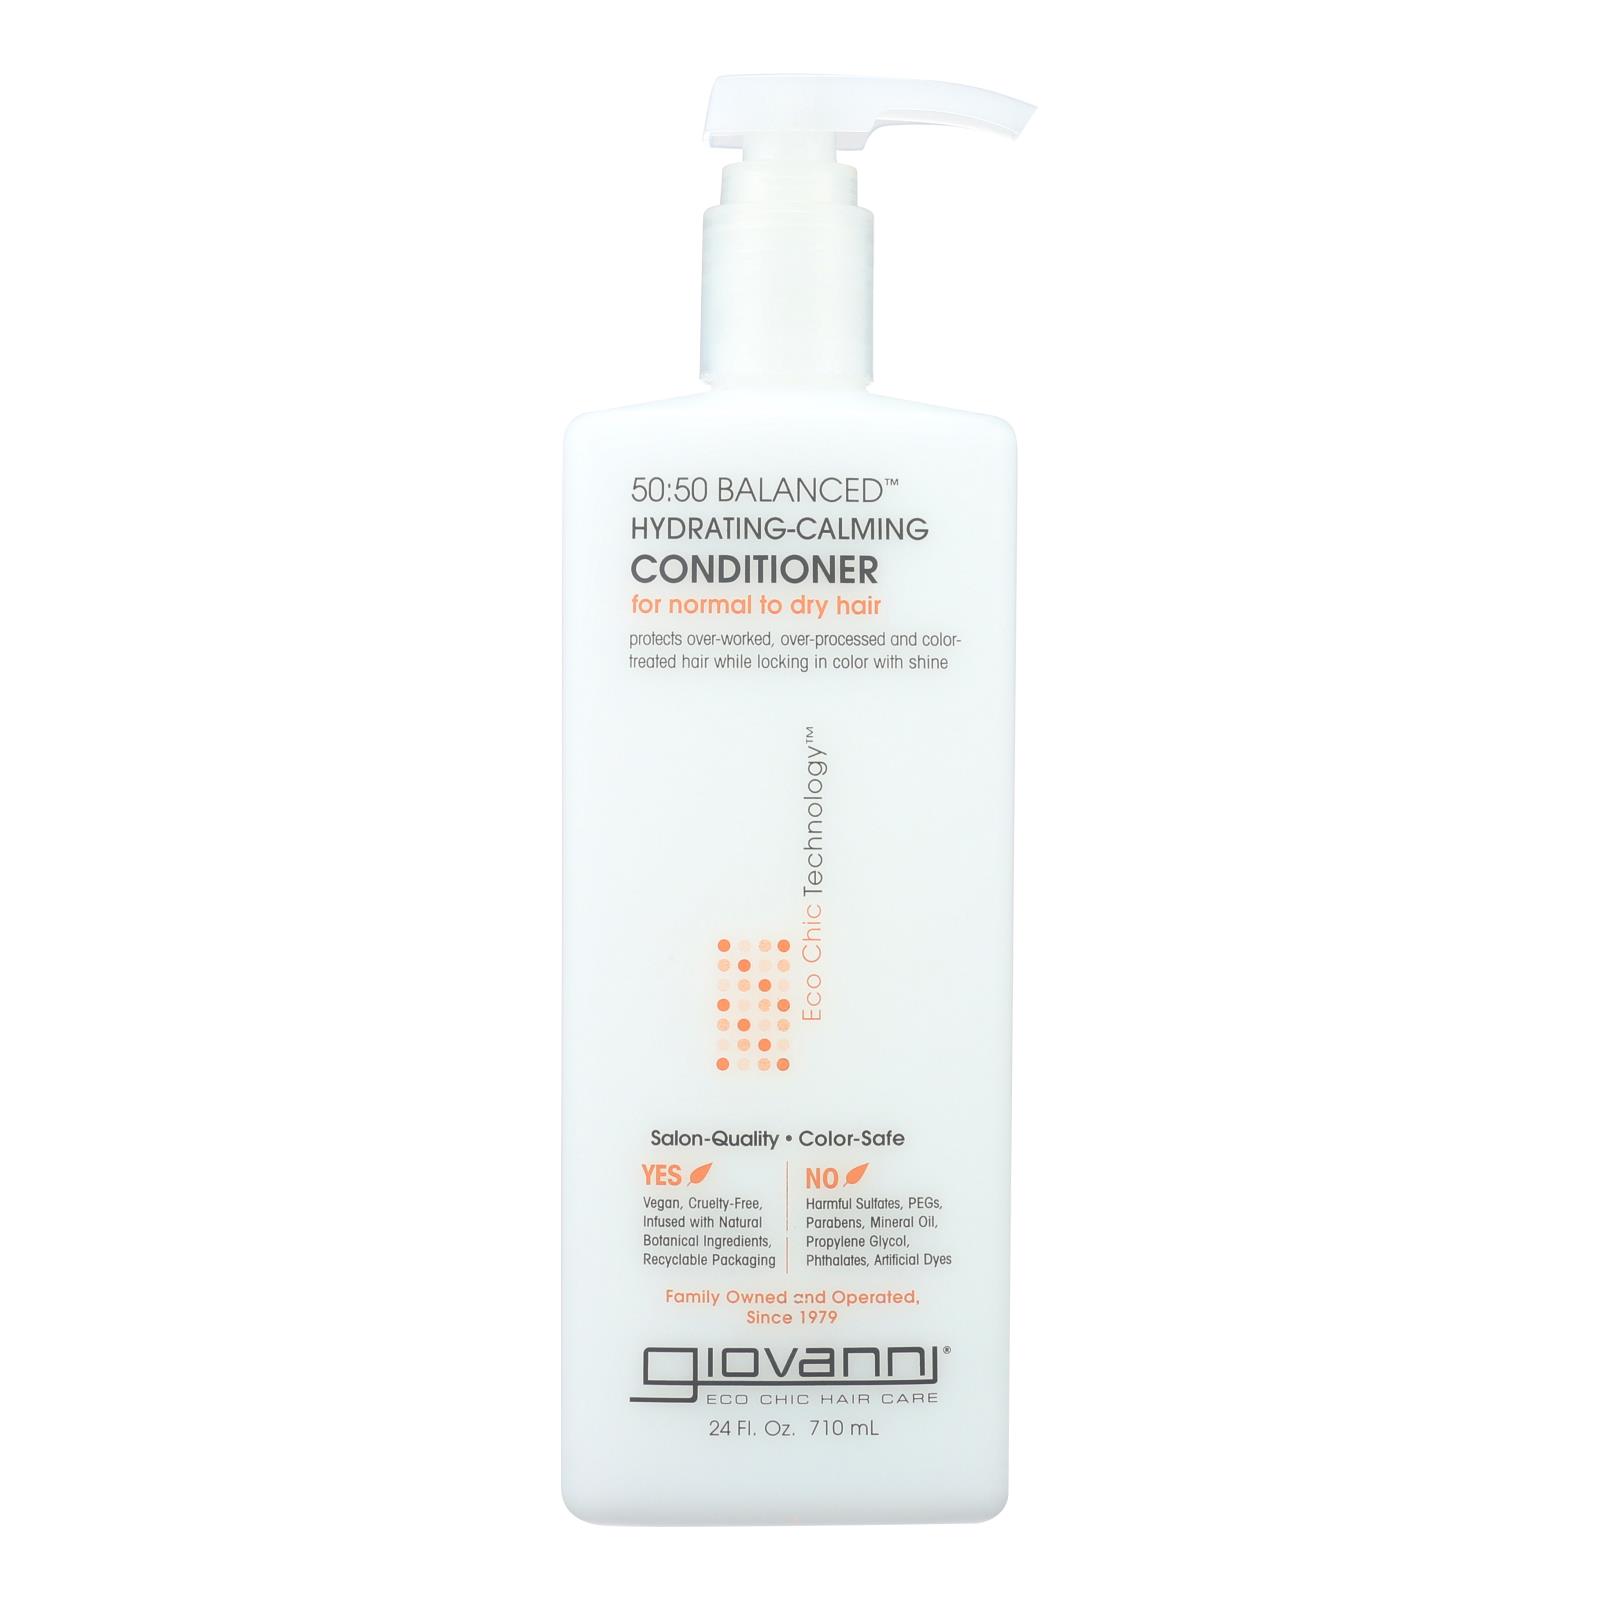 Giovanni Hair Care Products - Conditioner 50:50 Balance Hydrating - 24 FZ